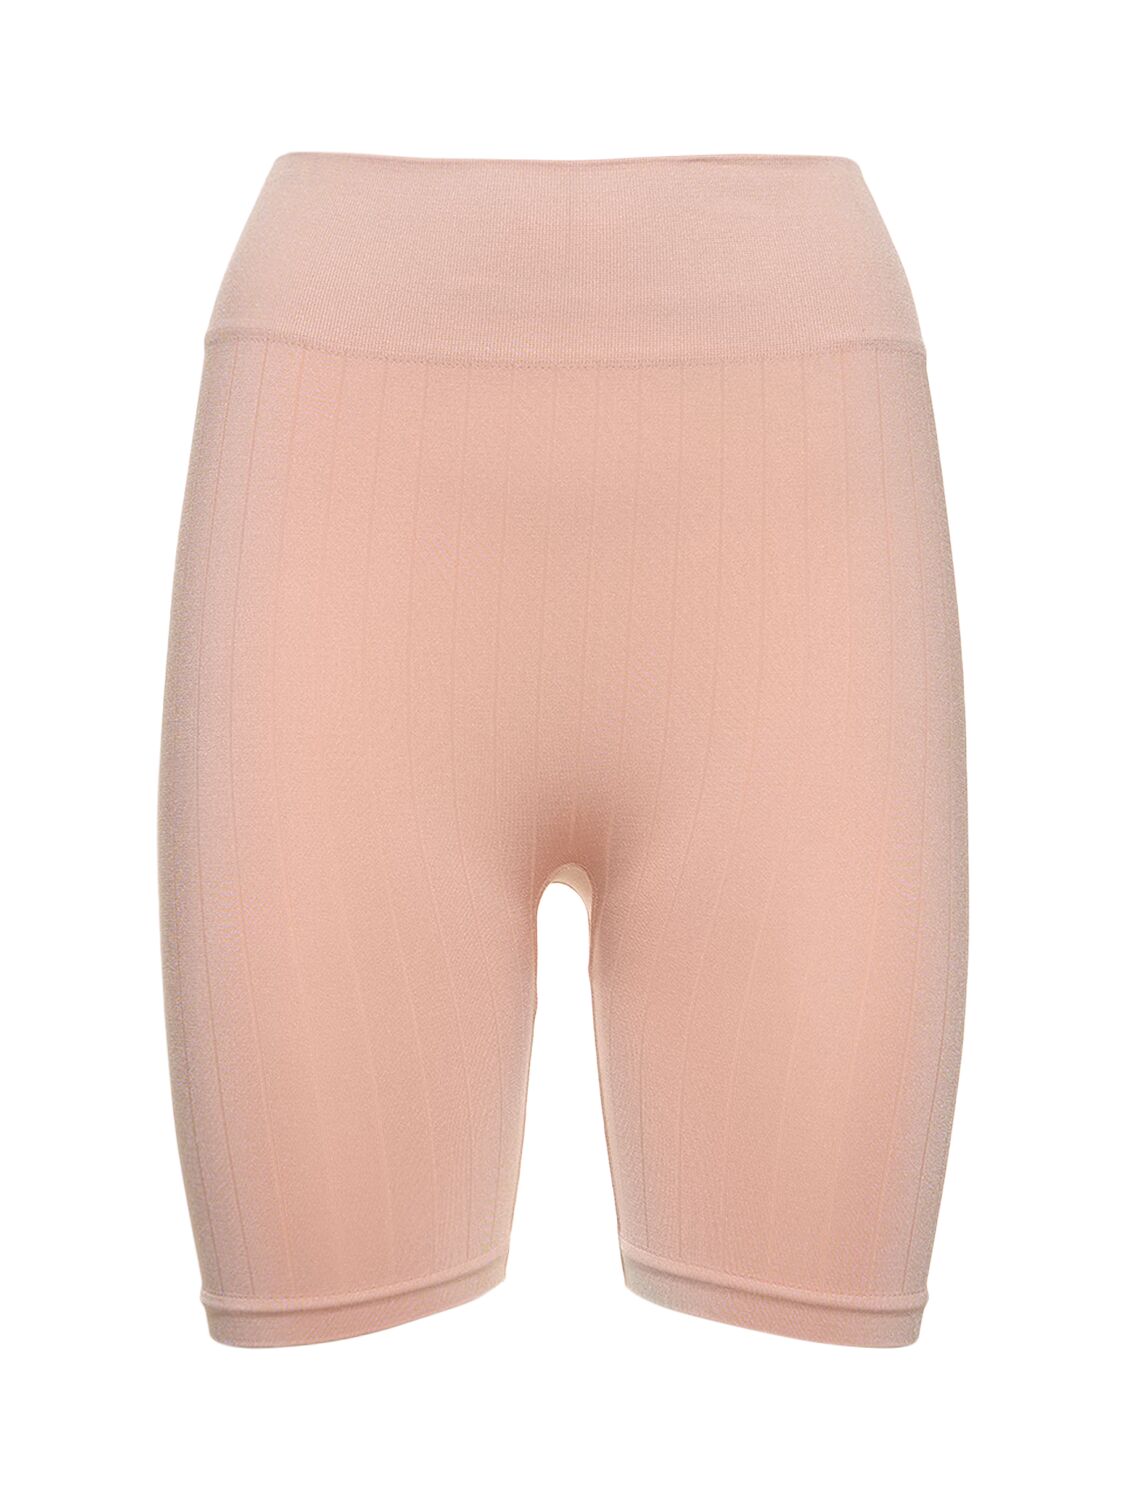 Prism Squared Fluid Flat Rib High Waist Shorts In Pink